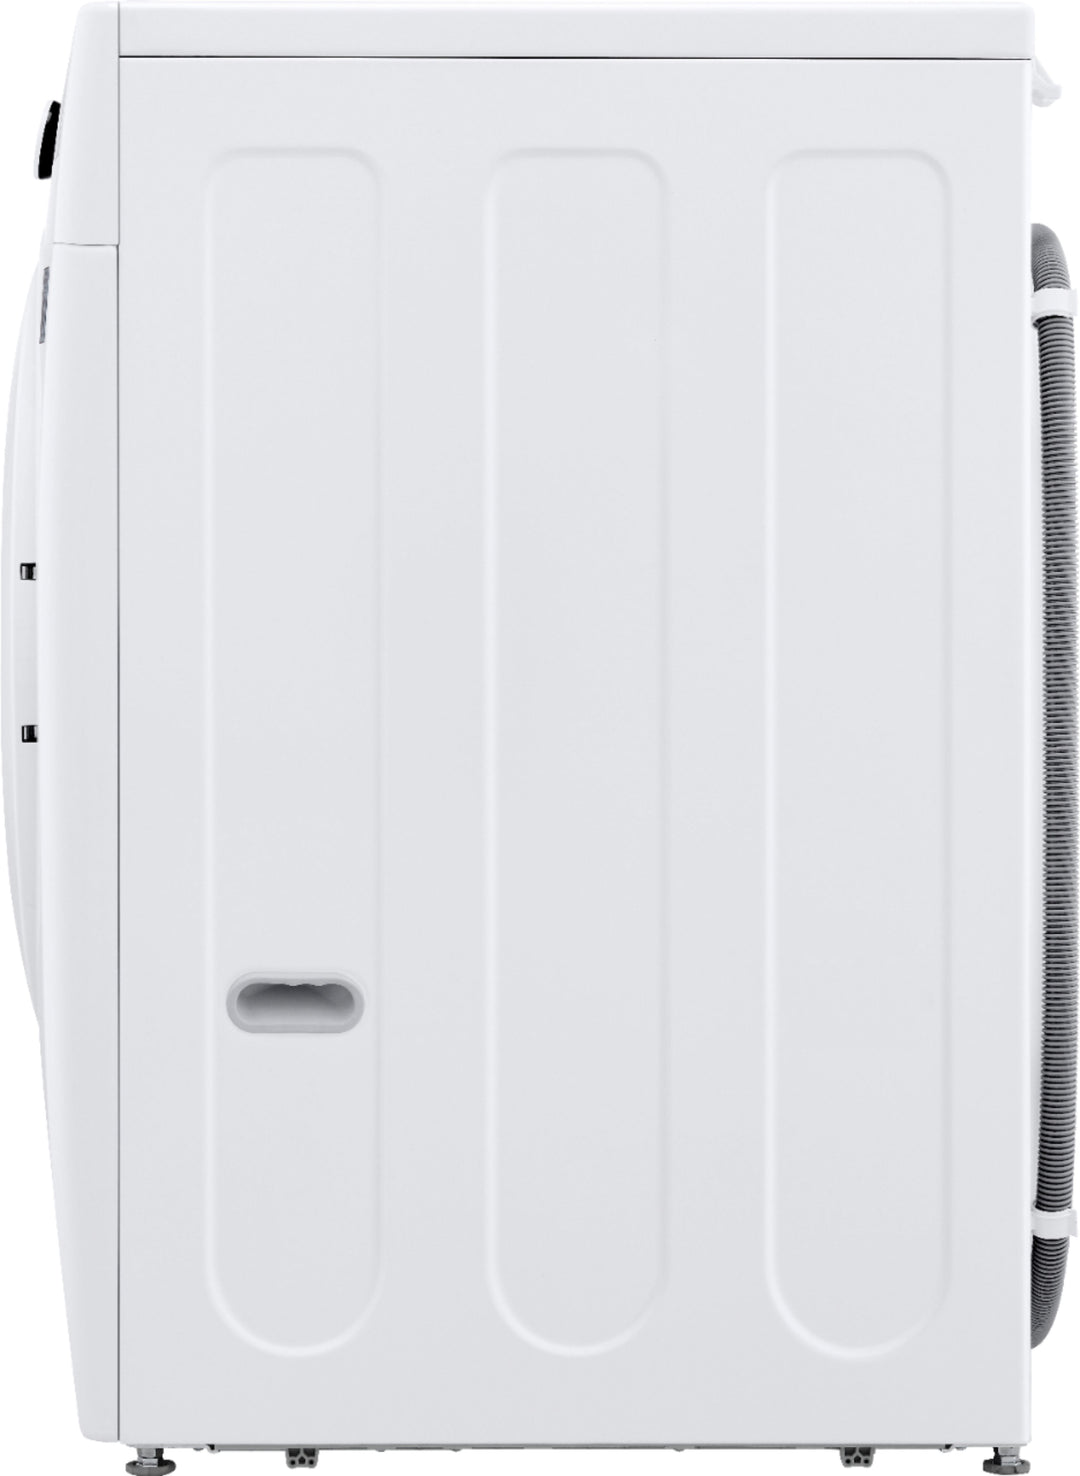 LG - 4.5 Cu. Ft. High Efficiency Stackable Front-Load Washer with 6Motion Technology - White_6